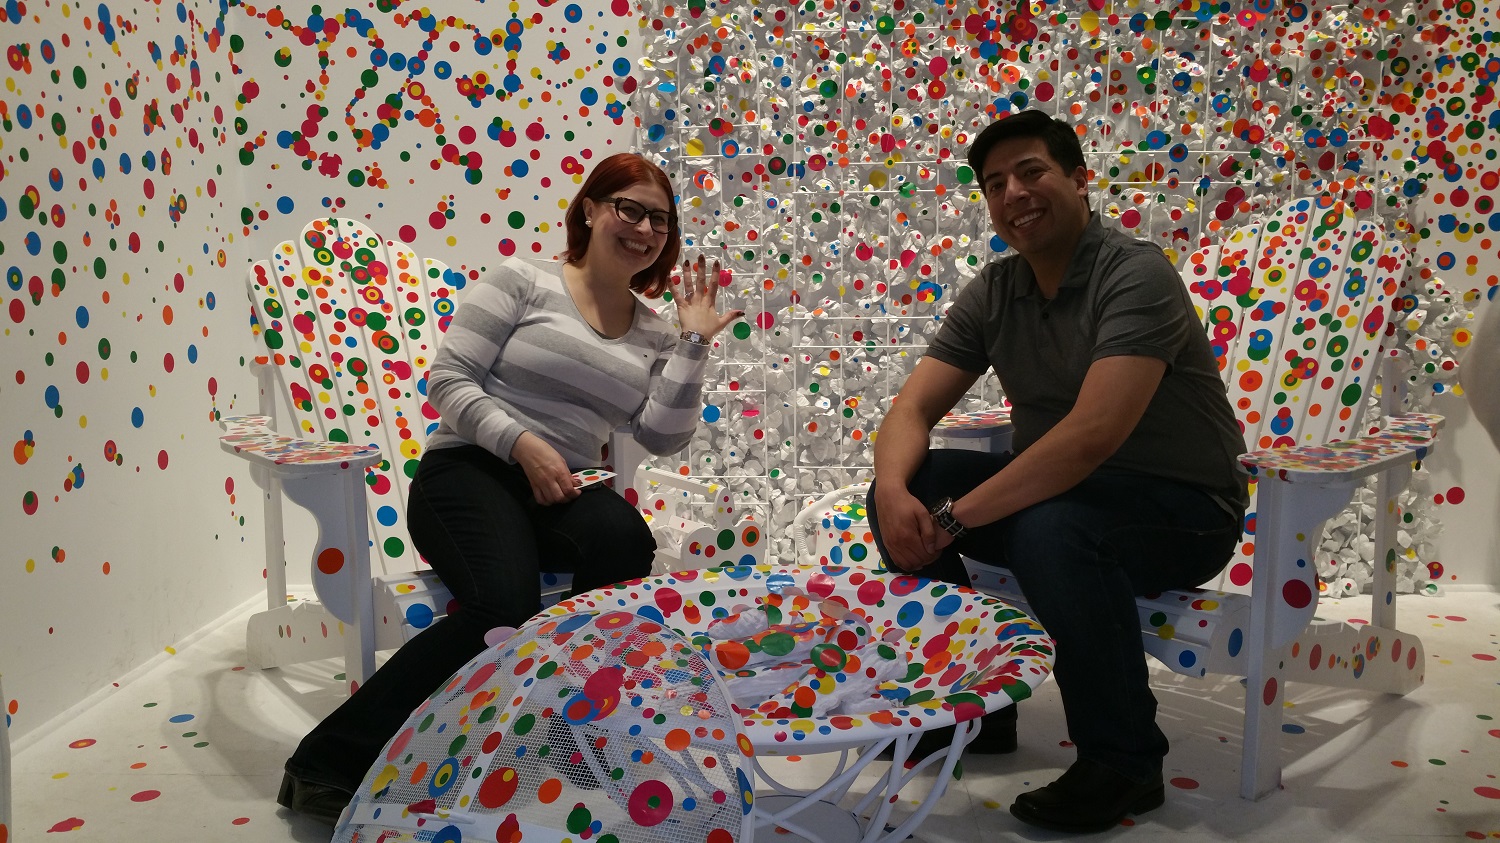 A woman shows off her engagement ring beside her fiance in Yayoi Kusamas Obliteration Room.